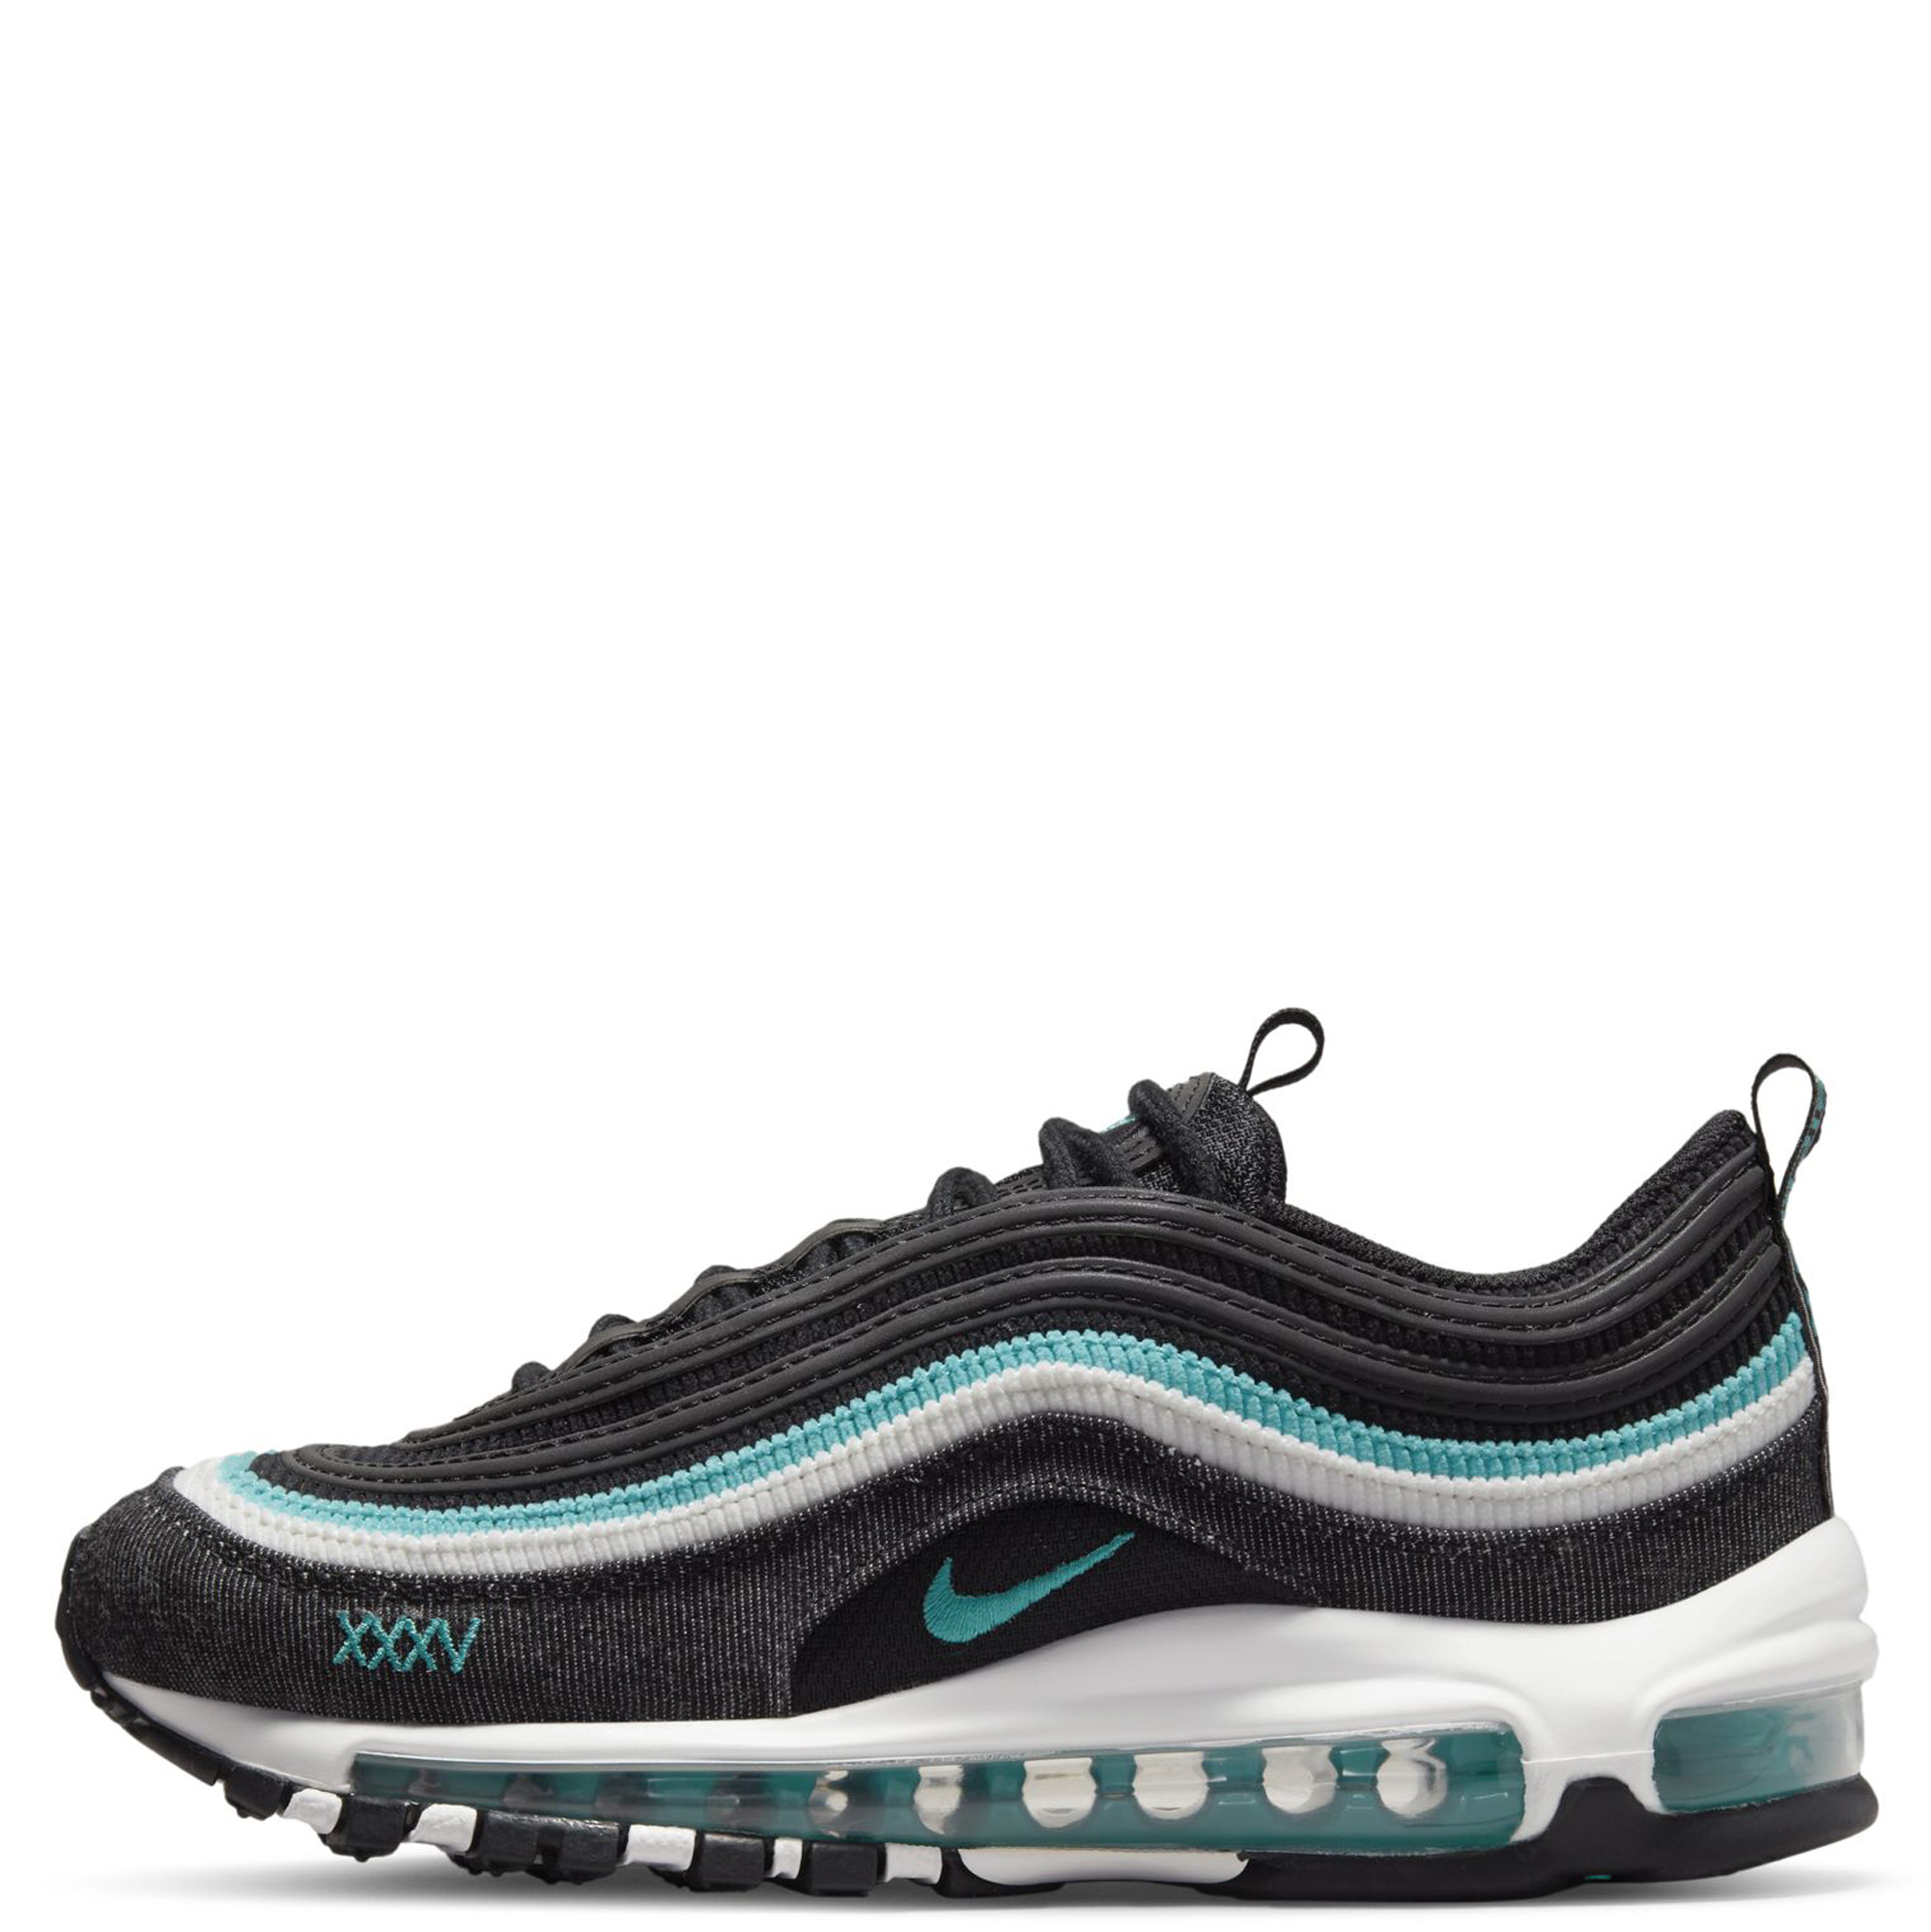 The guests Miles Fly kite NIKE (GS) Air Max 97 SE DN3275 001 - Shiekh